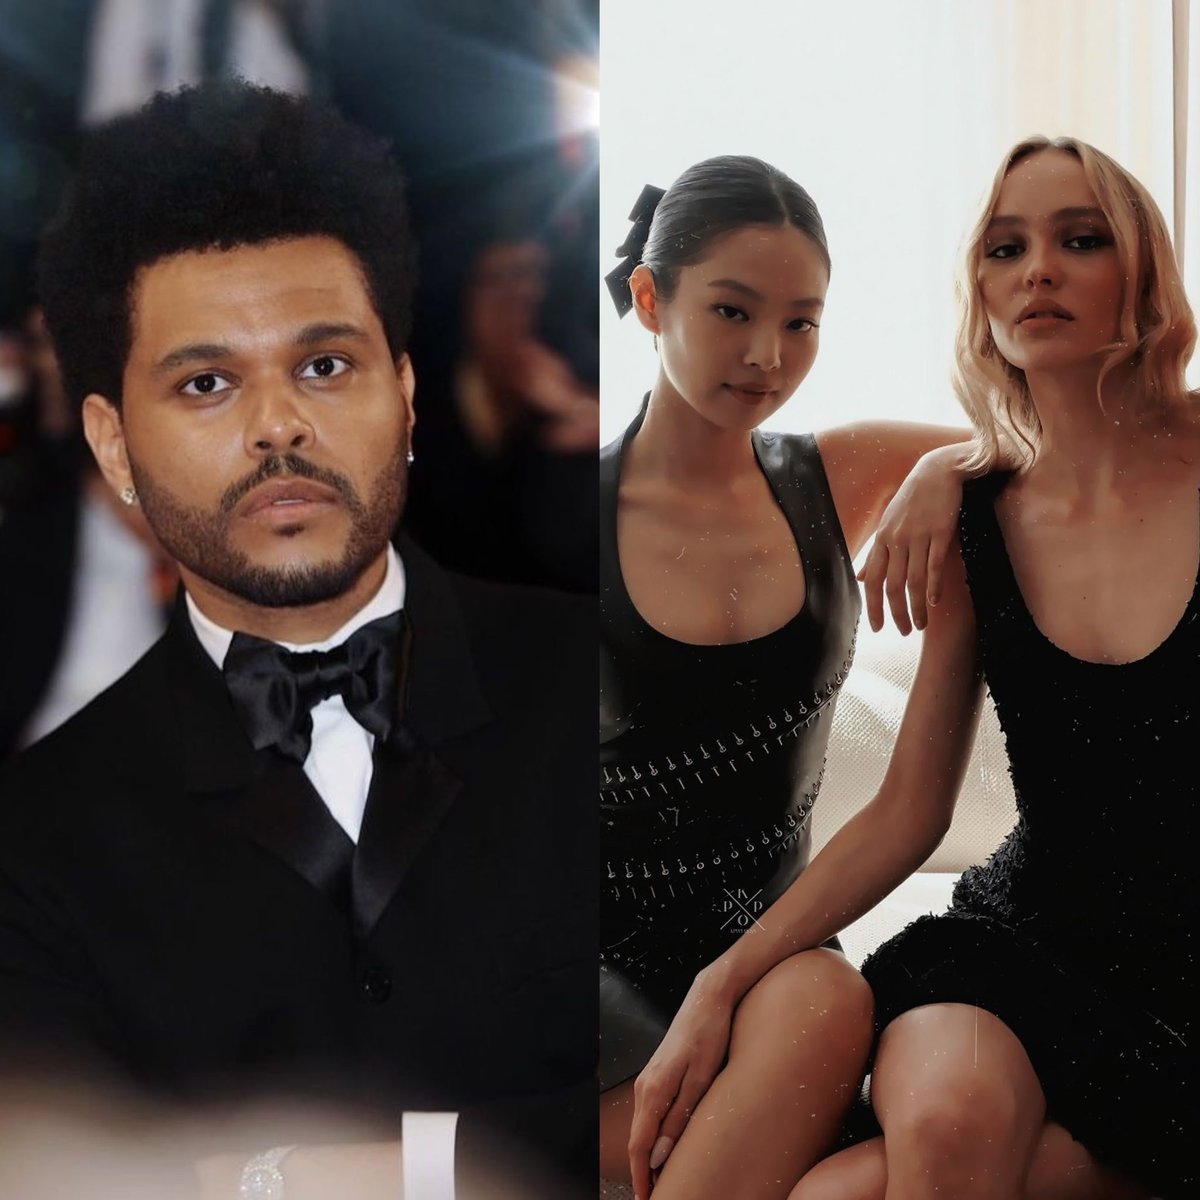 The Weeknd, Jennie & Lily-Rose Depp’s “One Of The Girls” is now eligible for Platinum certification by selling over 1 million units in the US.